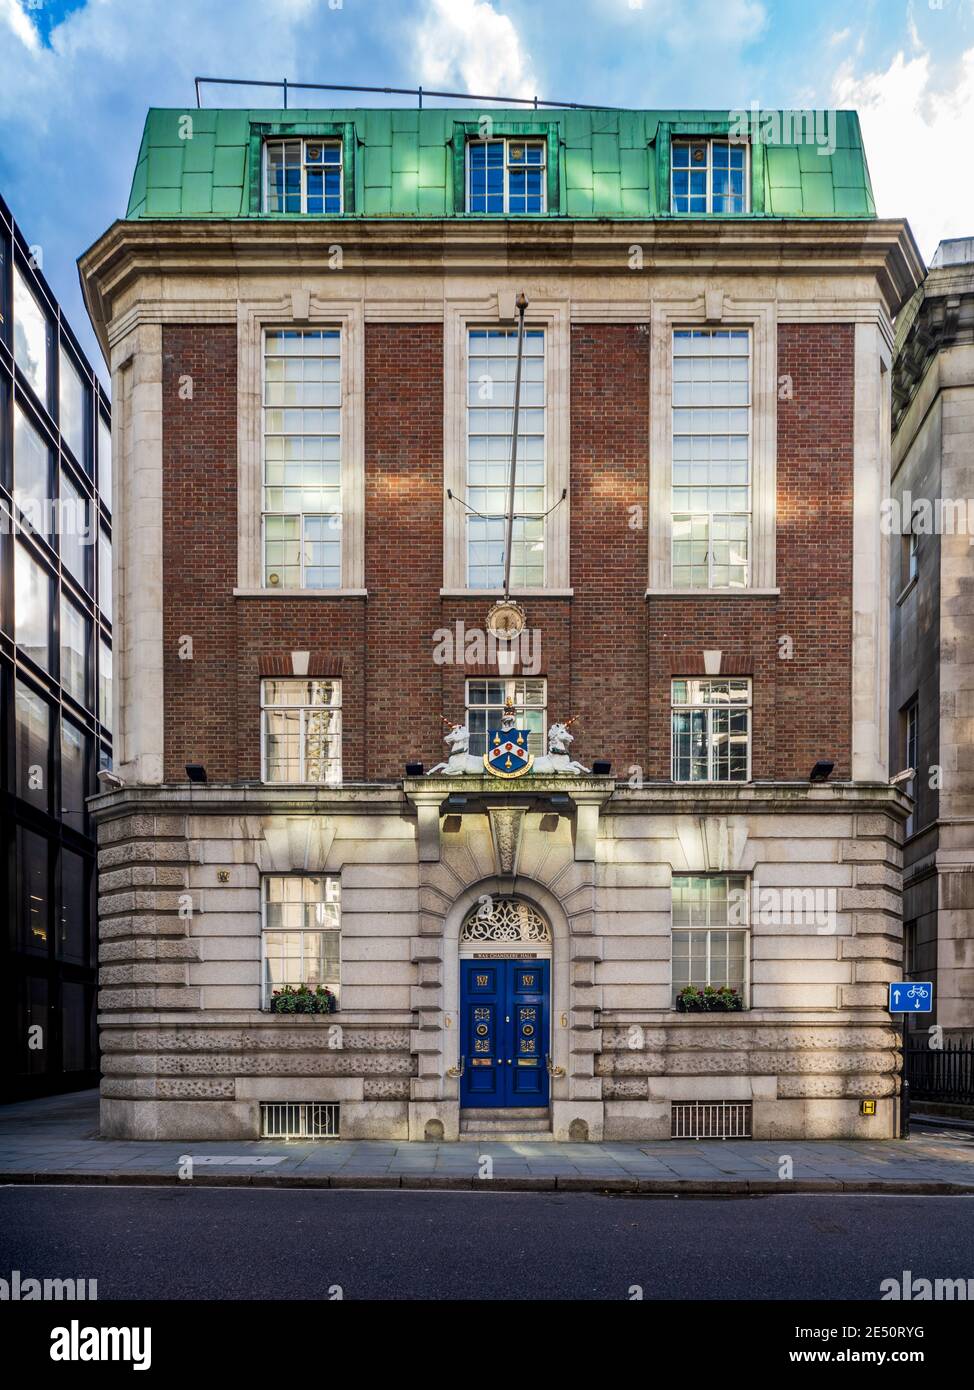 Wax Chandlers' Hall Gresham Street London - The Worshipful Company of Wax Chandlers was formed around 1330, the current building dates from 1954. Stock Photo